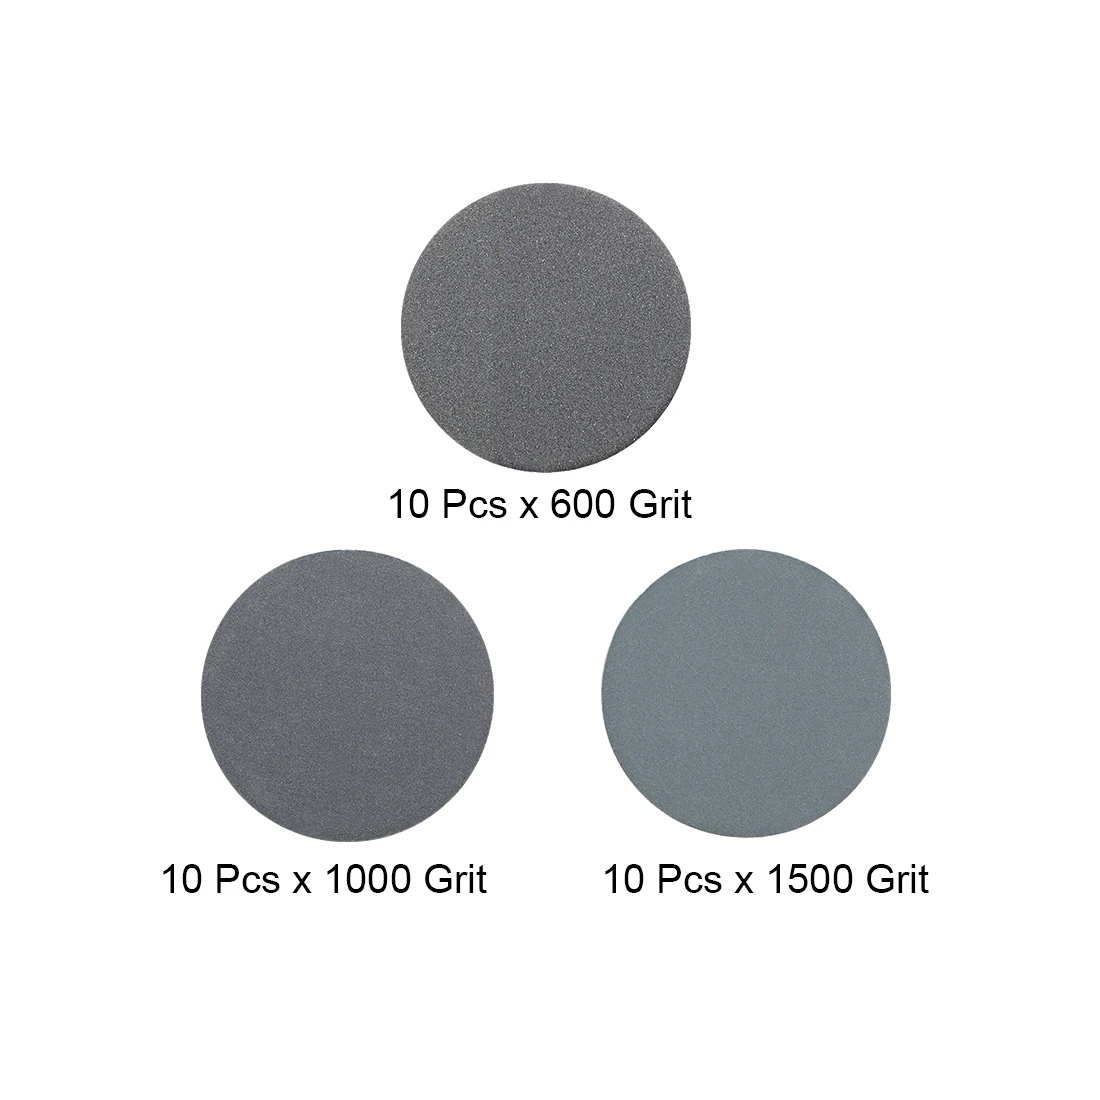 

uxcell 30 Pcs 1-Inch Hook and Loop Sanding Disc Wet/Dry Silicon Carbide 600/1000/1500 Grit Assorted for Polishing Furniture